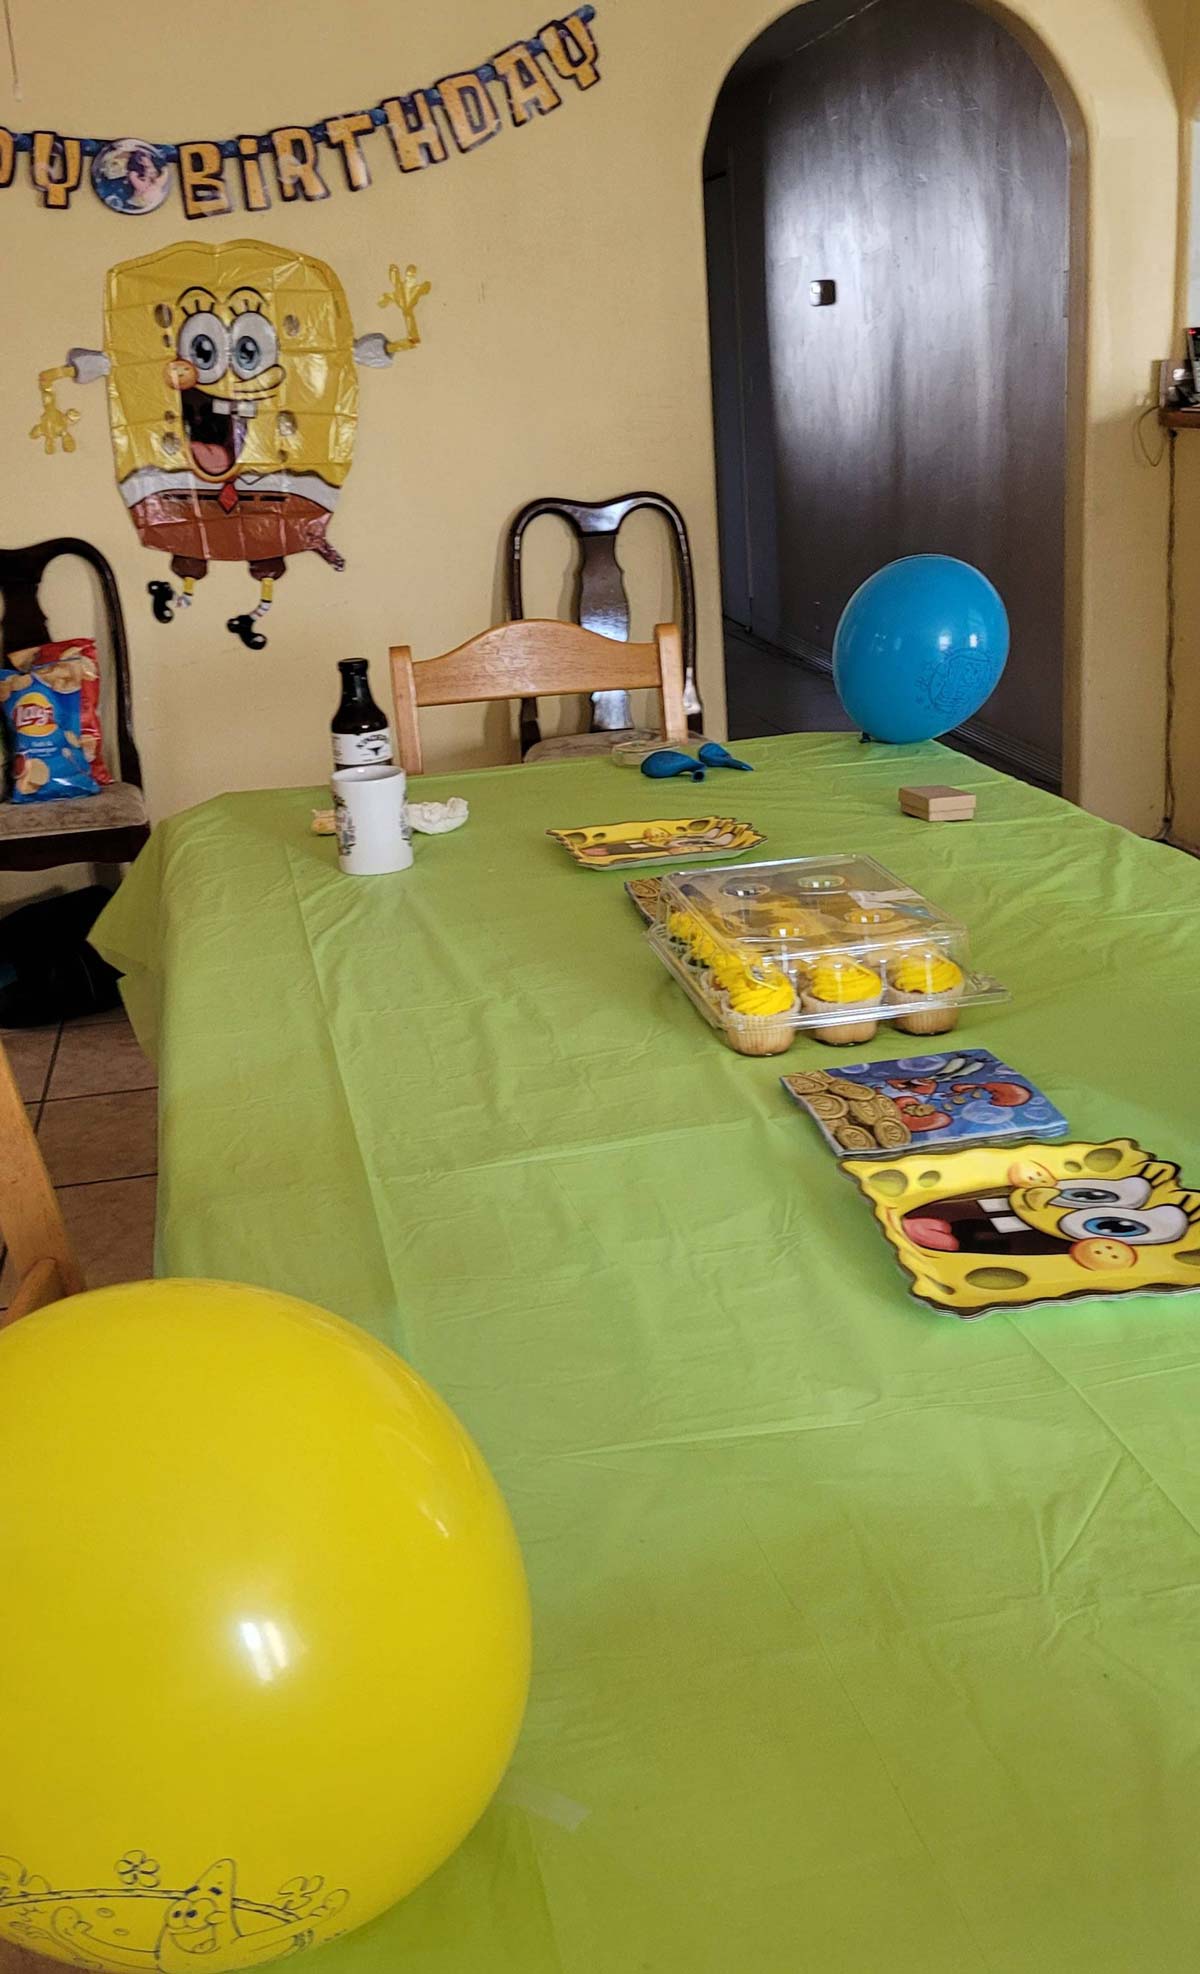 This was my 26th birthday party, set up by my family